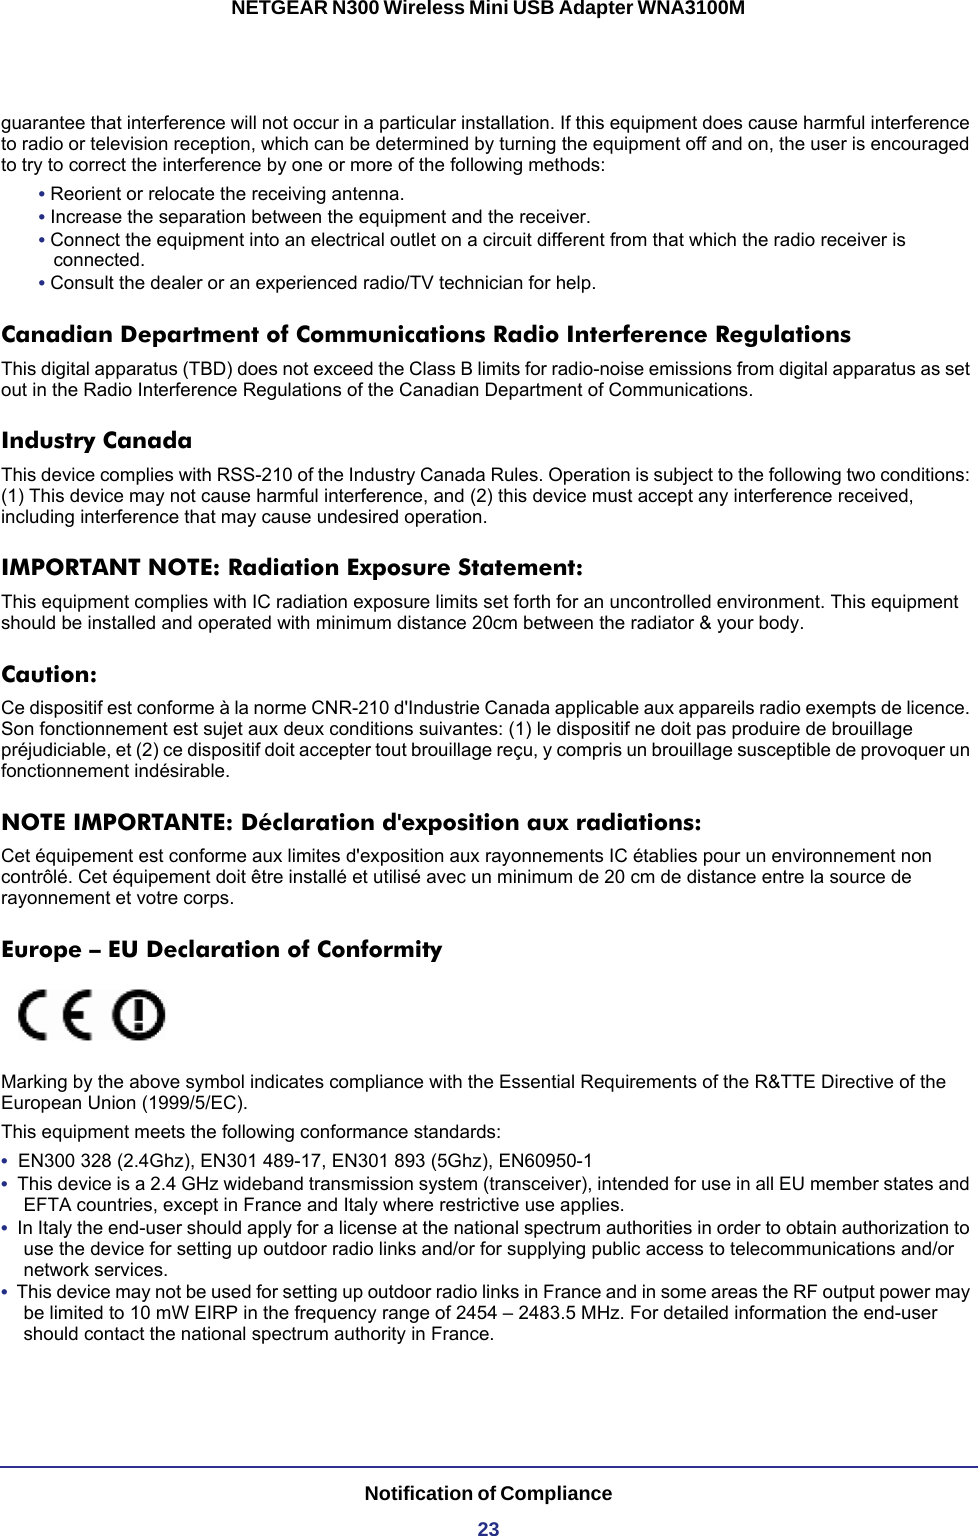 Notification of Compliance23NETGEAR N300 Wireless Mini USB Adapter WNA3100Mguarantee that interference will not occur in a particular installation. If this equipment does cause harmful interference to radio or television reception, which can be determined by turning the equipment off and on, the user is encouraged to try to correct the interference by one or more of the following methods:• Reorient or relocate the receiving antenna.• Increase the separation between the equipment and the receiver.• Connect the equipment into an electrical outlet on a circuit different from that which the radio receiver is connected.• Consult the dealer or an experienced radio/TV technician for help.Canadian Department of Communications Radio Interference RegulationsThis digital apparatus (TBD) does not exceed the Class B limits for radio-noise emissions from digital apparatus as set out in the Radio Interference Regulations of the Canadian Department of Communications.Industry CanadaThis device complies with RSS-210 of the Industry Canada Rules. Operation is subject to the following two conditions: (1) This device may not cause harmful interference, and (2) this device must accept any interference received, including interference that may cause undesired operation.IMPORTANT NOTE: Radiation Exposure Statement:This equipment complies with IC radiation exposure limits set forth for an uncontrolled environment. This equipment should be installed and operated with minimum distance 20cm between the radiator &amp; your body.Caution:Ce dispositif est conforme à la norme CNR-210 d&apos;Industrie Canada applicable aux appareils radio exempts de licence. Son fonctionnement est sujet aux deux conditions suivantes: (1) le dispositif ne doit pas produire de brouillage préjudiciable, et (2) ce dispositif doit accepter tout brouillage reçu, y compris un brouillage susceptible de provoquer un fonctionnement indésirable.NOTE IMPORTANTE: Déclaration d&apos;exposition aux radiations:Cet équipement est conforme aux limites d&apos;exposition aux rayonnements IC établies pour un environnement non contrôlé. Cet équipement doit être installé et utilisé avec un minimum de 20 cm de distance entre la source de rayonnement et votre corps.Europe – EU Declaration of ConformityMarking by the above symbol indicates compliance with the Essential Requirements of the R&amp;TTE Directive of the European Union (1999/5/EC). This equipment meets the following conformance standards:•  EN300 328 (2.4Ghz), EN301 489-17, EN301 893 (5Ghz), EN60950-1•  This device is a 2.4 GHz wideband transmission system (transceiver), intended for use in all EU member states and EFTA countries, except in France and Italy where restrictive use applies.•  In Italy the end-user should apply for a license at the national spectrum authorities in order to obtain authorization to use the device for setting up outdoor radio links and/or for supplying public access to telecommunications and/or network services.•  This device may not be used for setting up outdoor radio links in France and in some areas the RF output power may be limited to 10 mW EIRP in the frequency range of 2454 – 2483.5 MHz. For detailed information the end-user should contact the national spectrum authority in France.